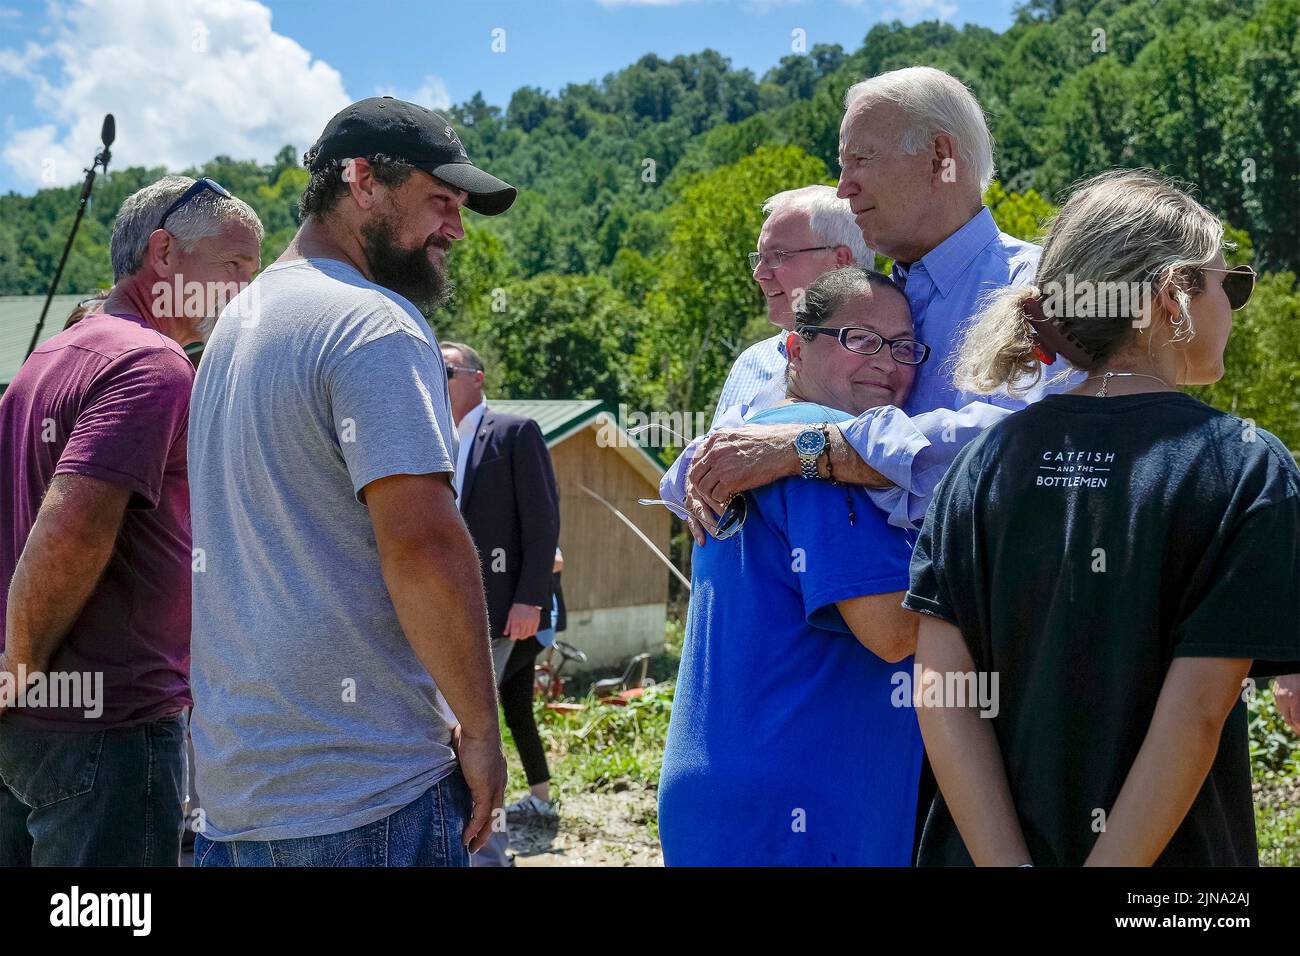 Lost Creek, United States of America. 08 August, 2022. U.S President Joe Biden, embraces a flood victim during a tour of the region devastated by flash floods, August 8, 2022, in Lost Creek, Kentucky. Credit: Adam Schultz/White House Photo/Alamy Live News Stock Photo